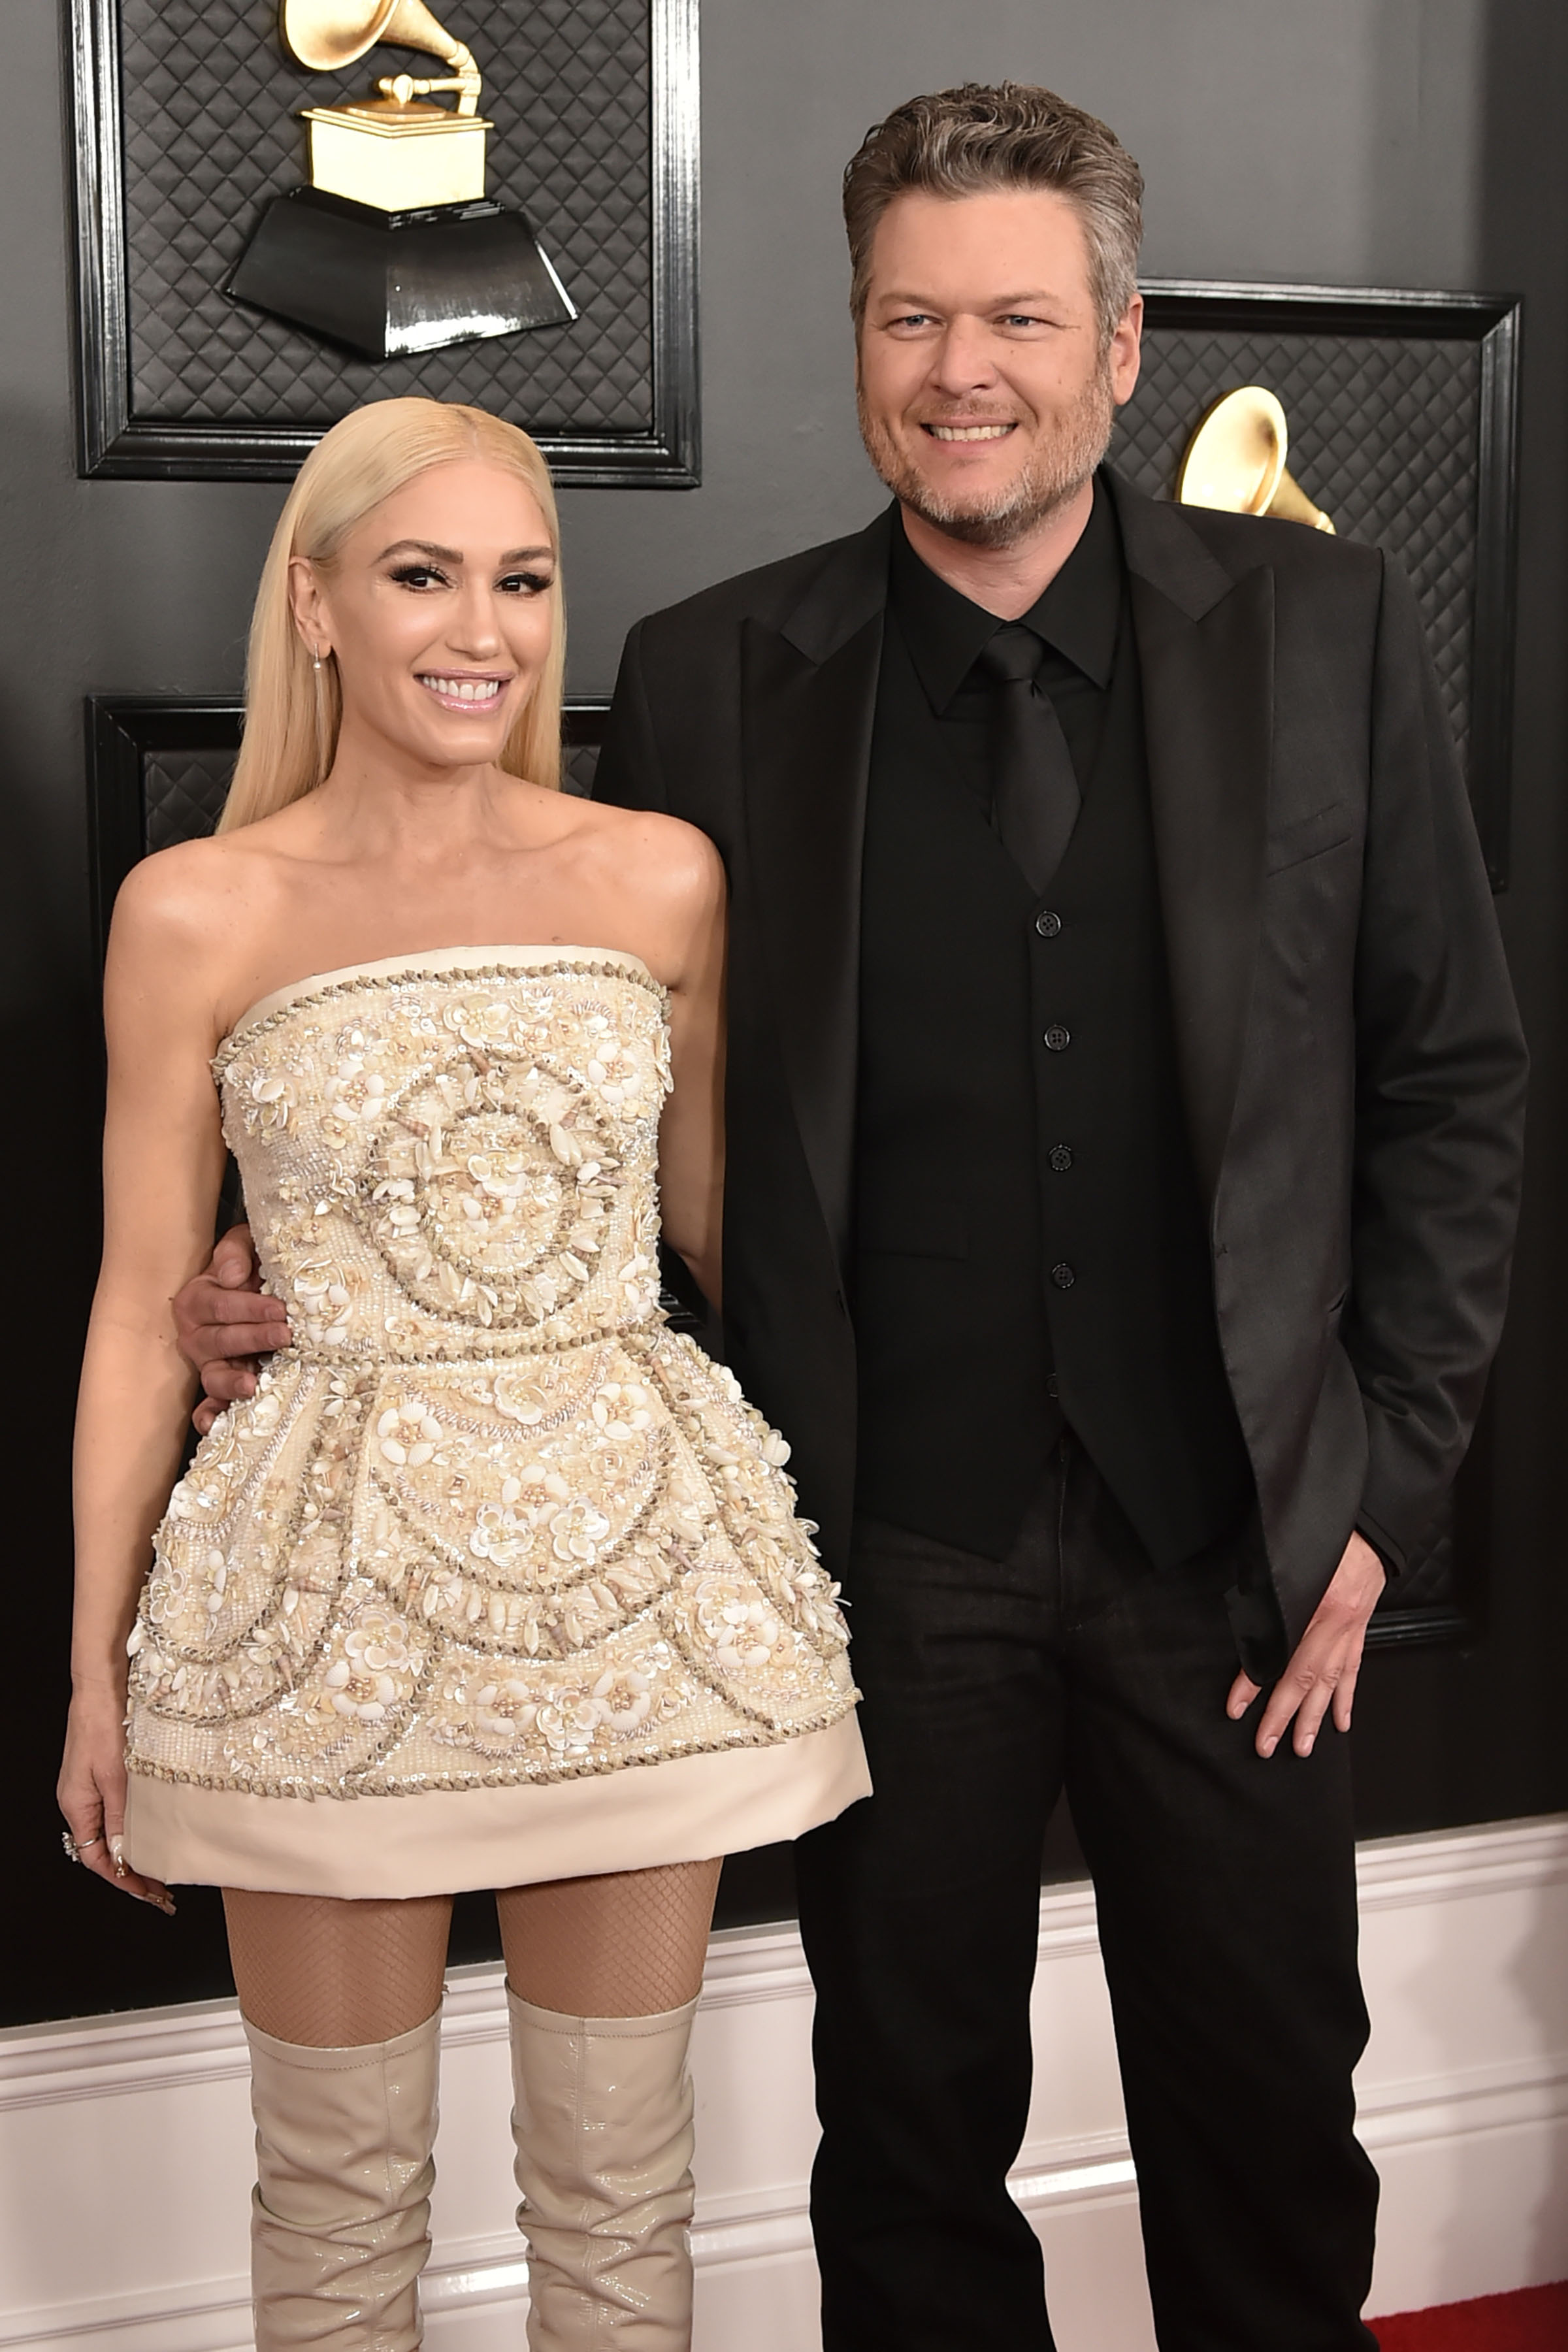 The clip comes after he and his wife, Gwen Stefani, are reportedly having marital issues